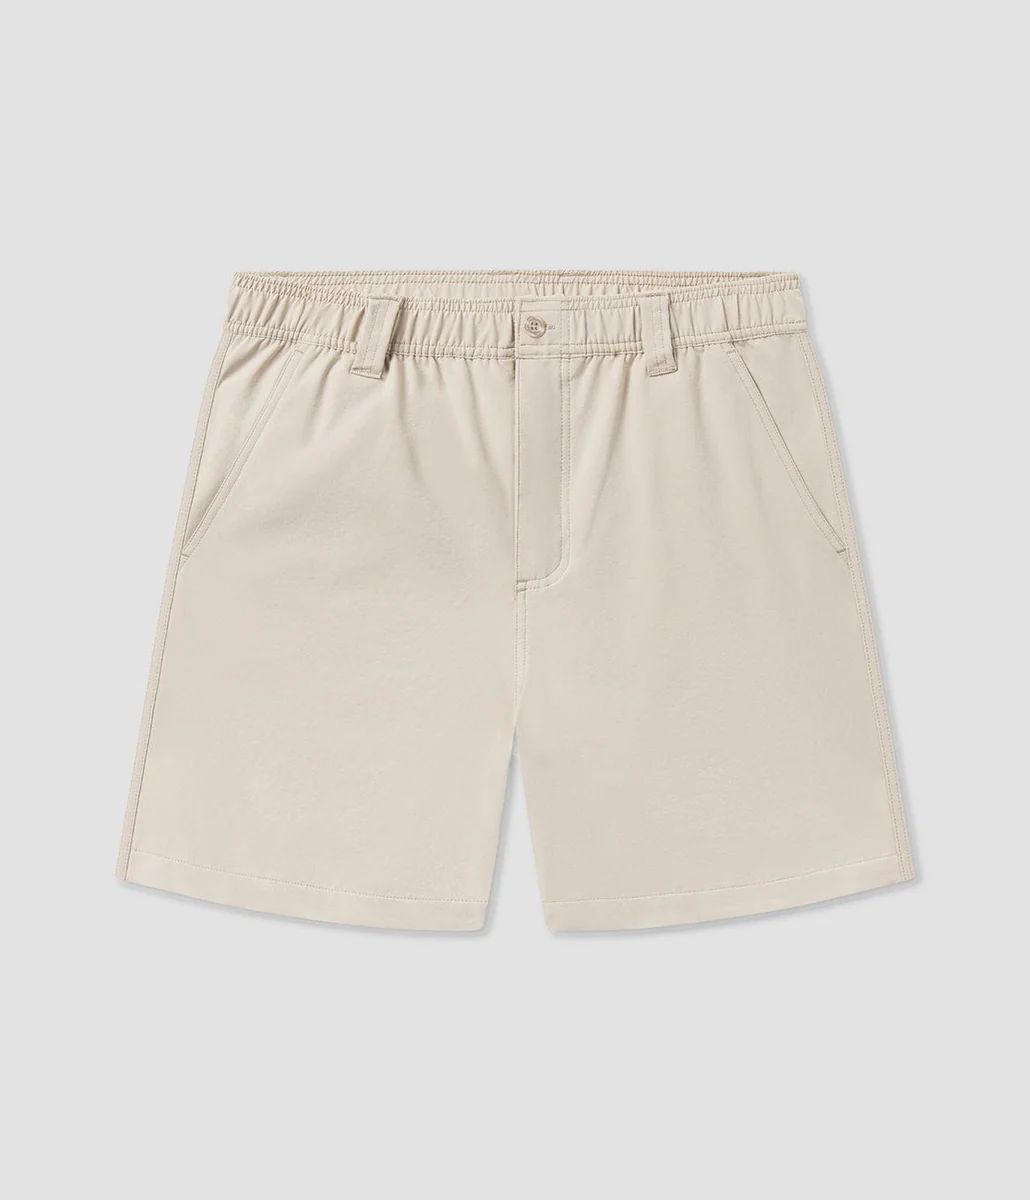 Nomad Shorts | Packable Men's Performance Shorts | Southern Shirt